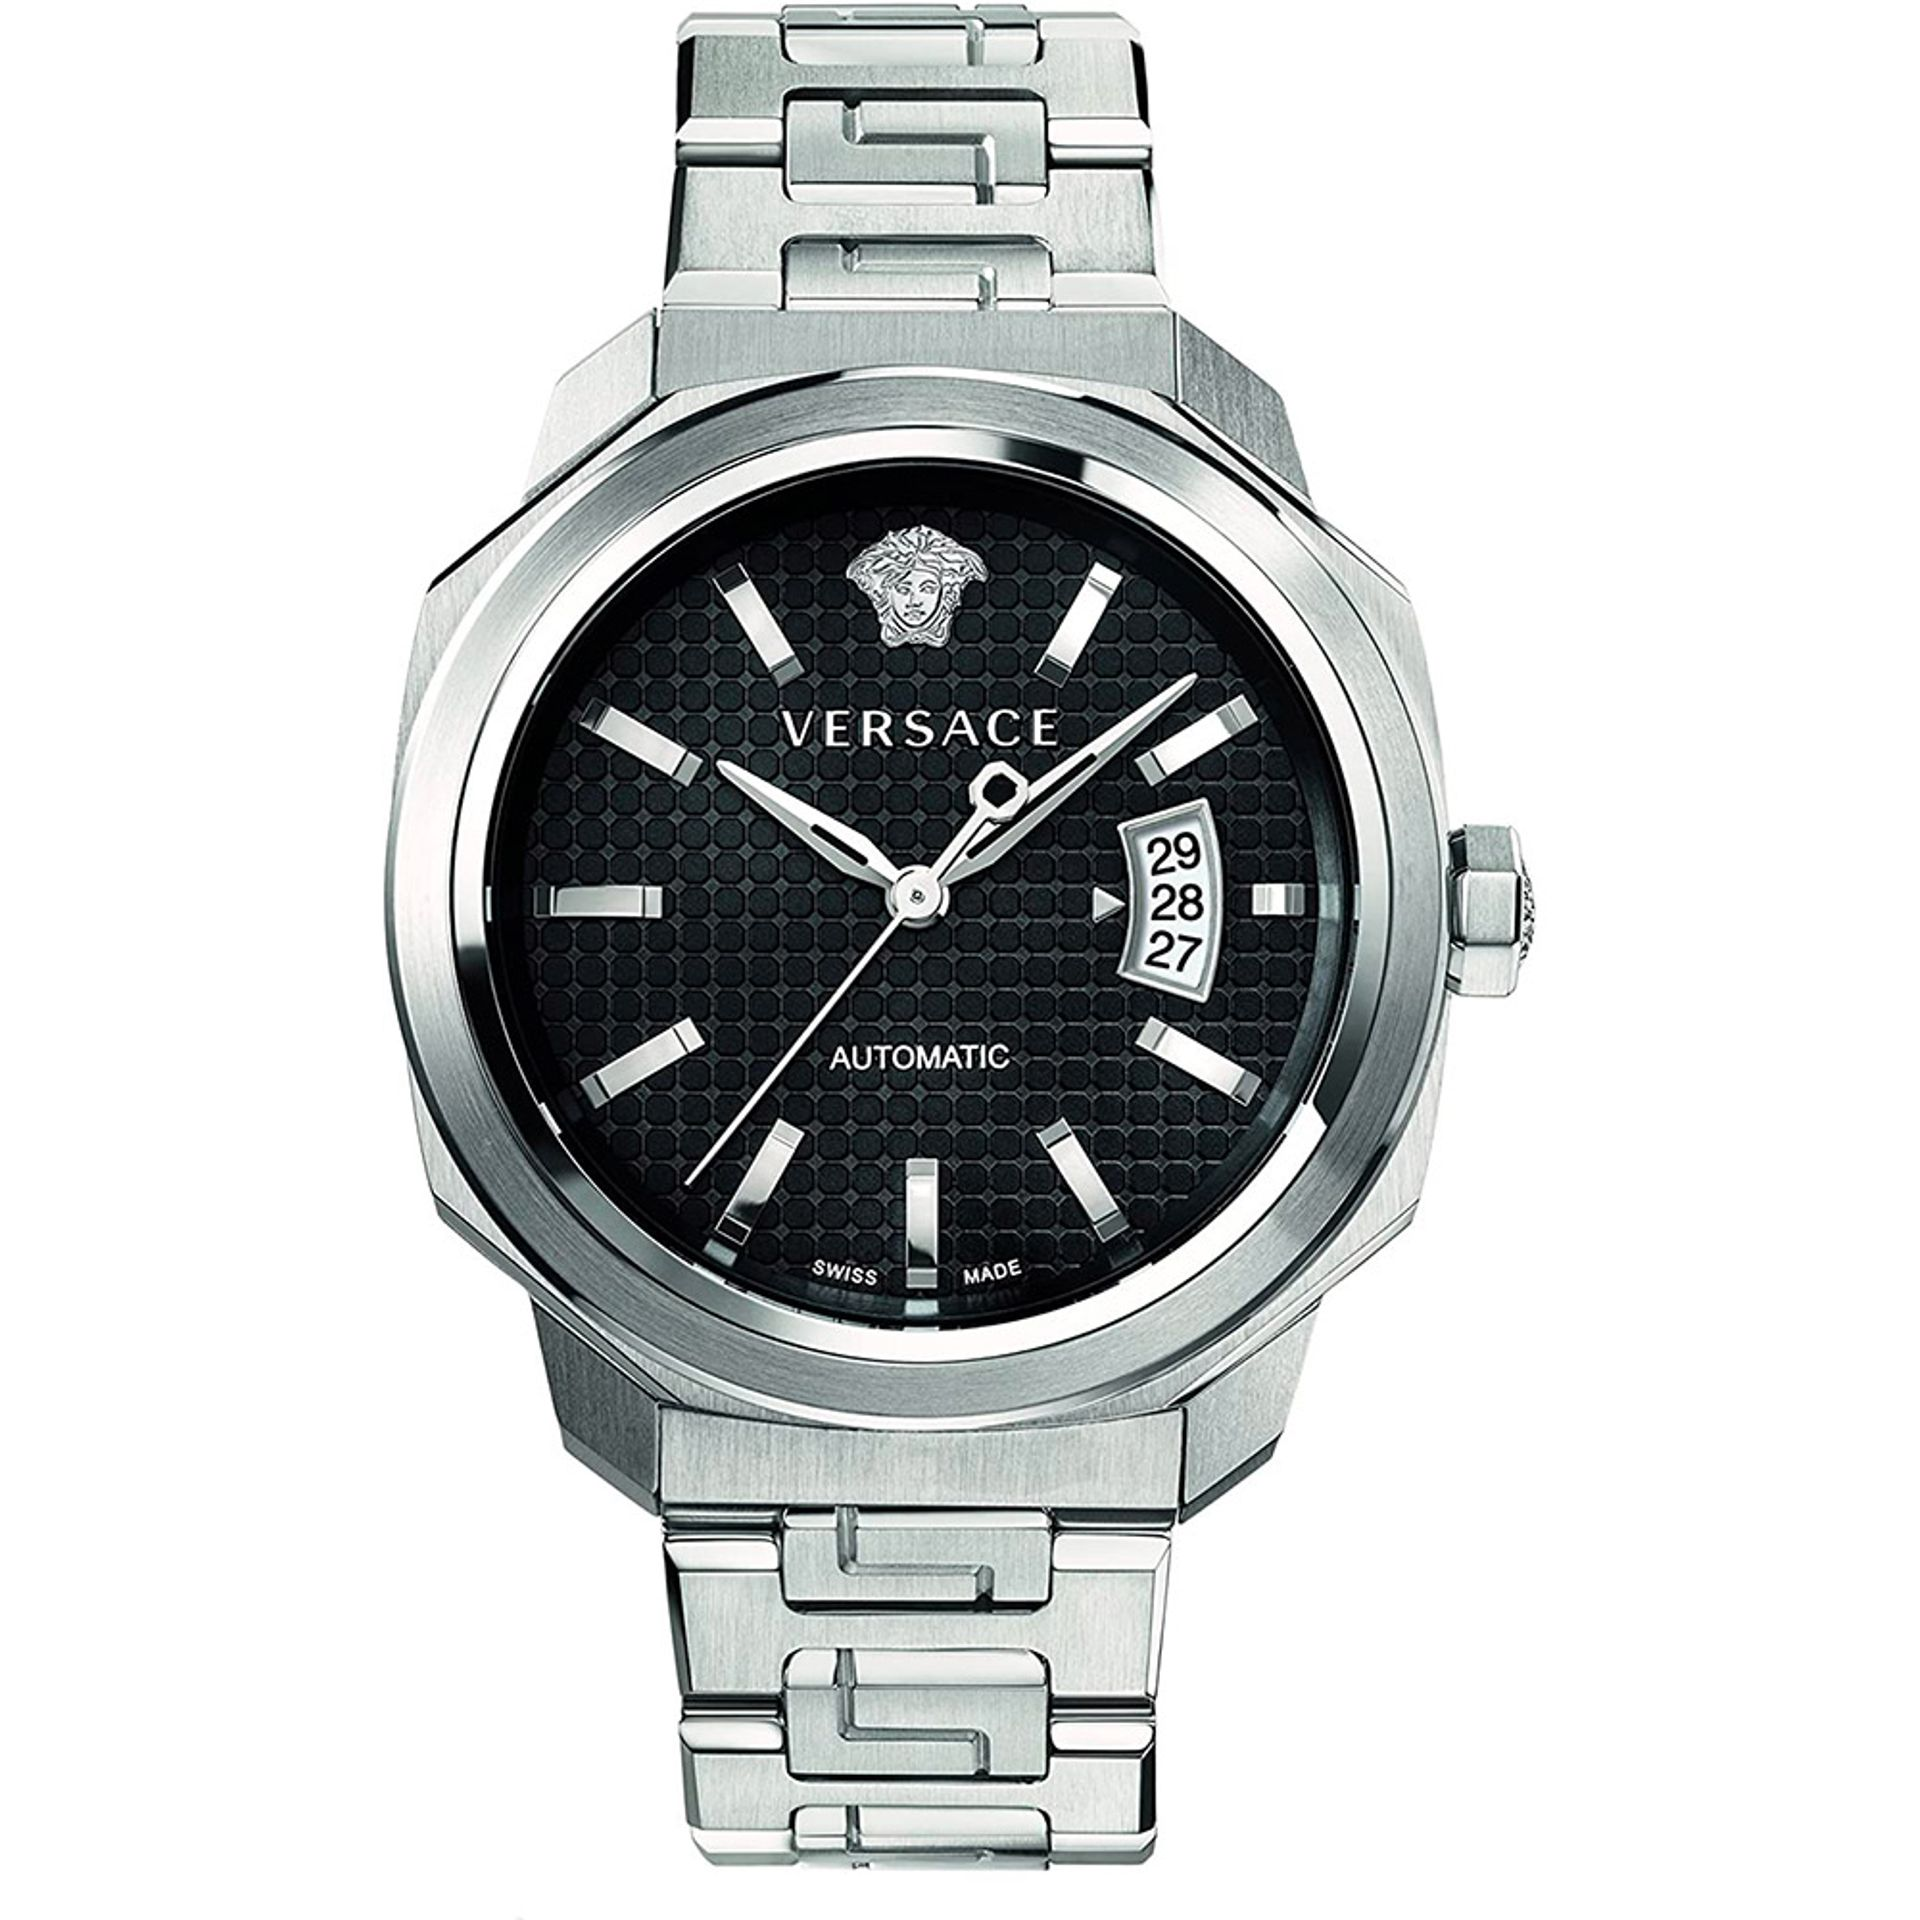 Versace Designer Mens Watches At Discount Prices